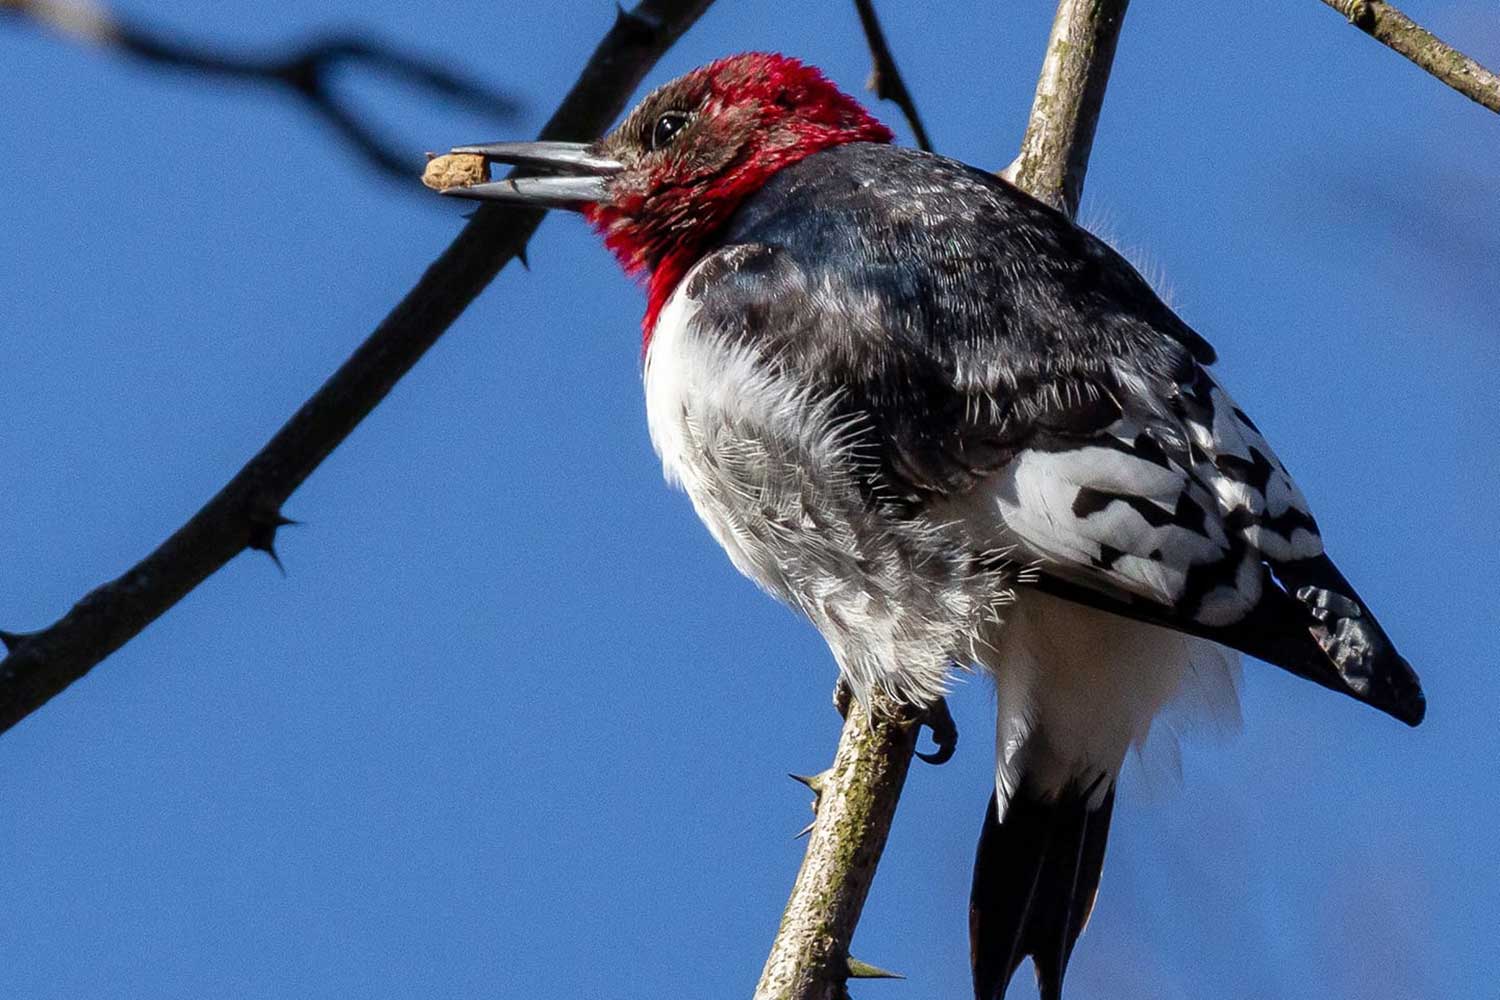 A red-headed woodpecker perched on a small branch with a seed in its mouth.